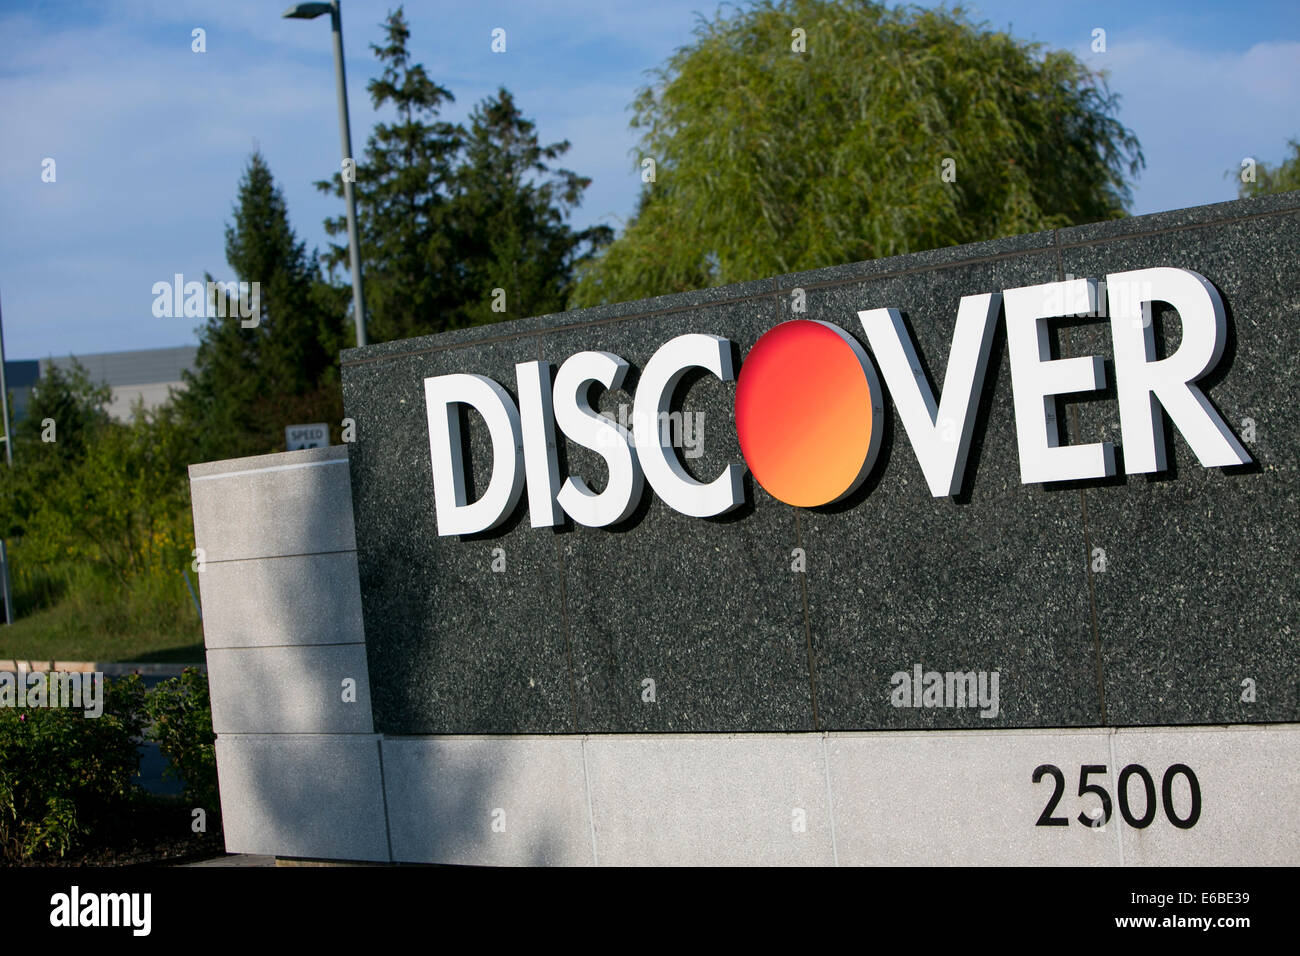 The headquarters of Discover Financial Services in Riverwoods, Illinois. Stock Photo